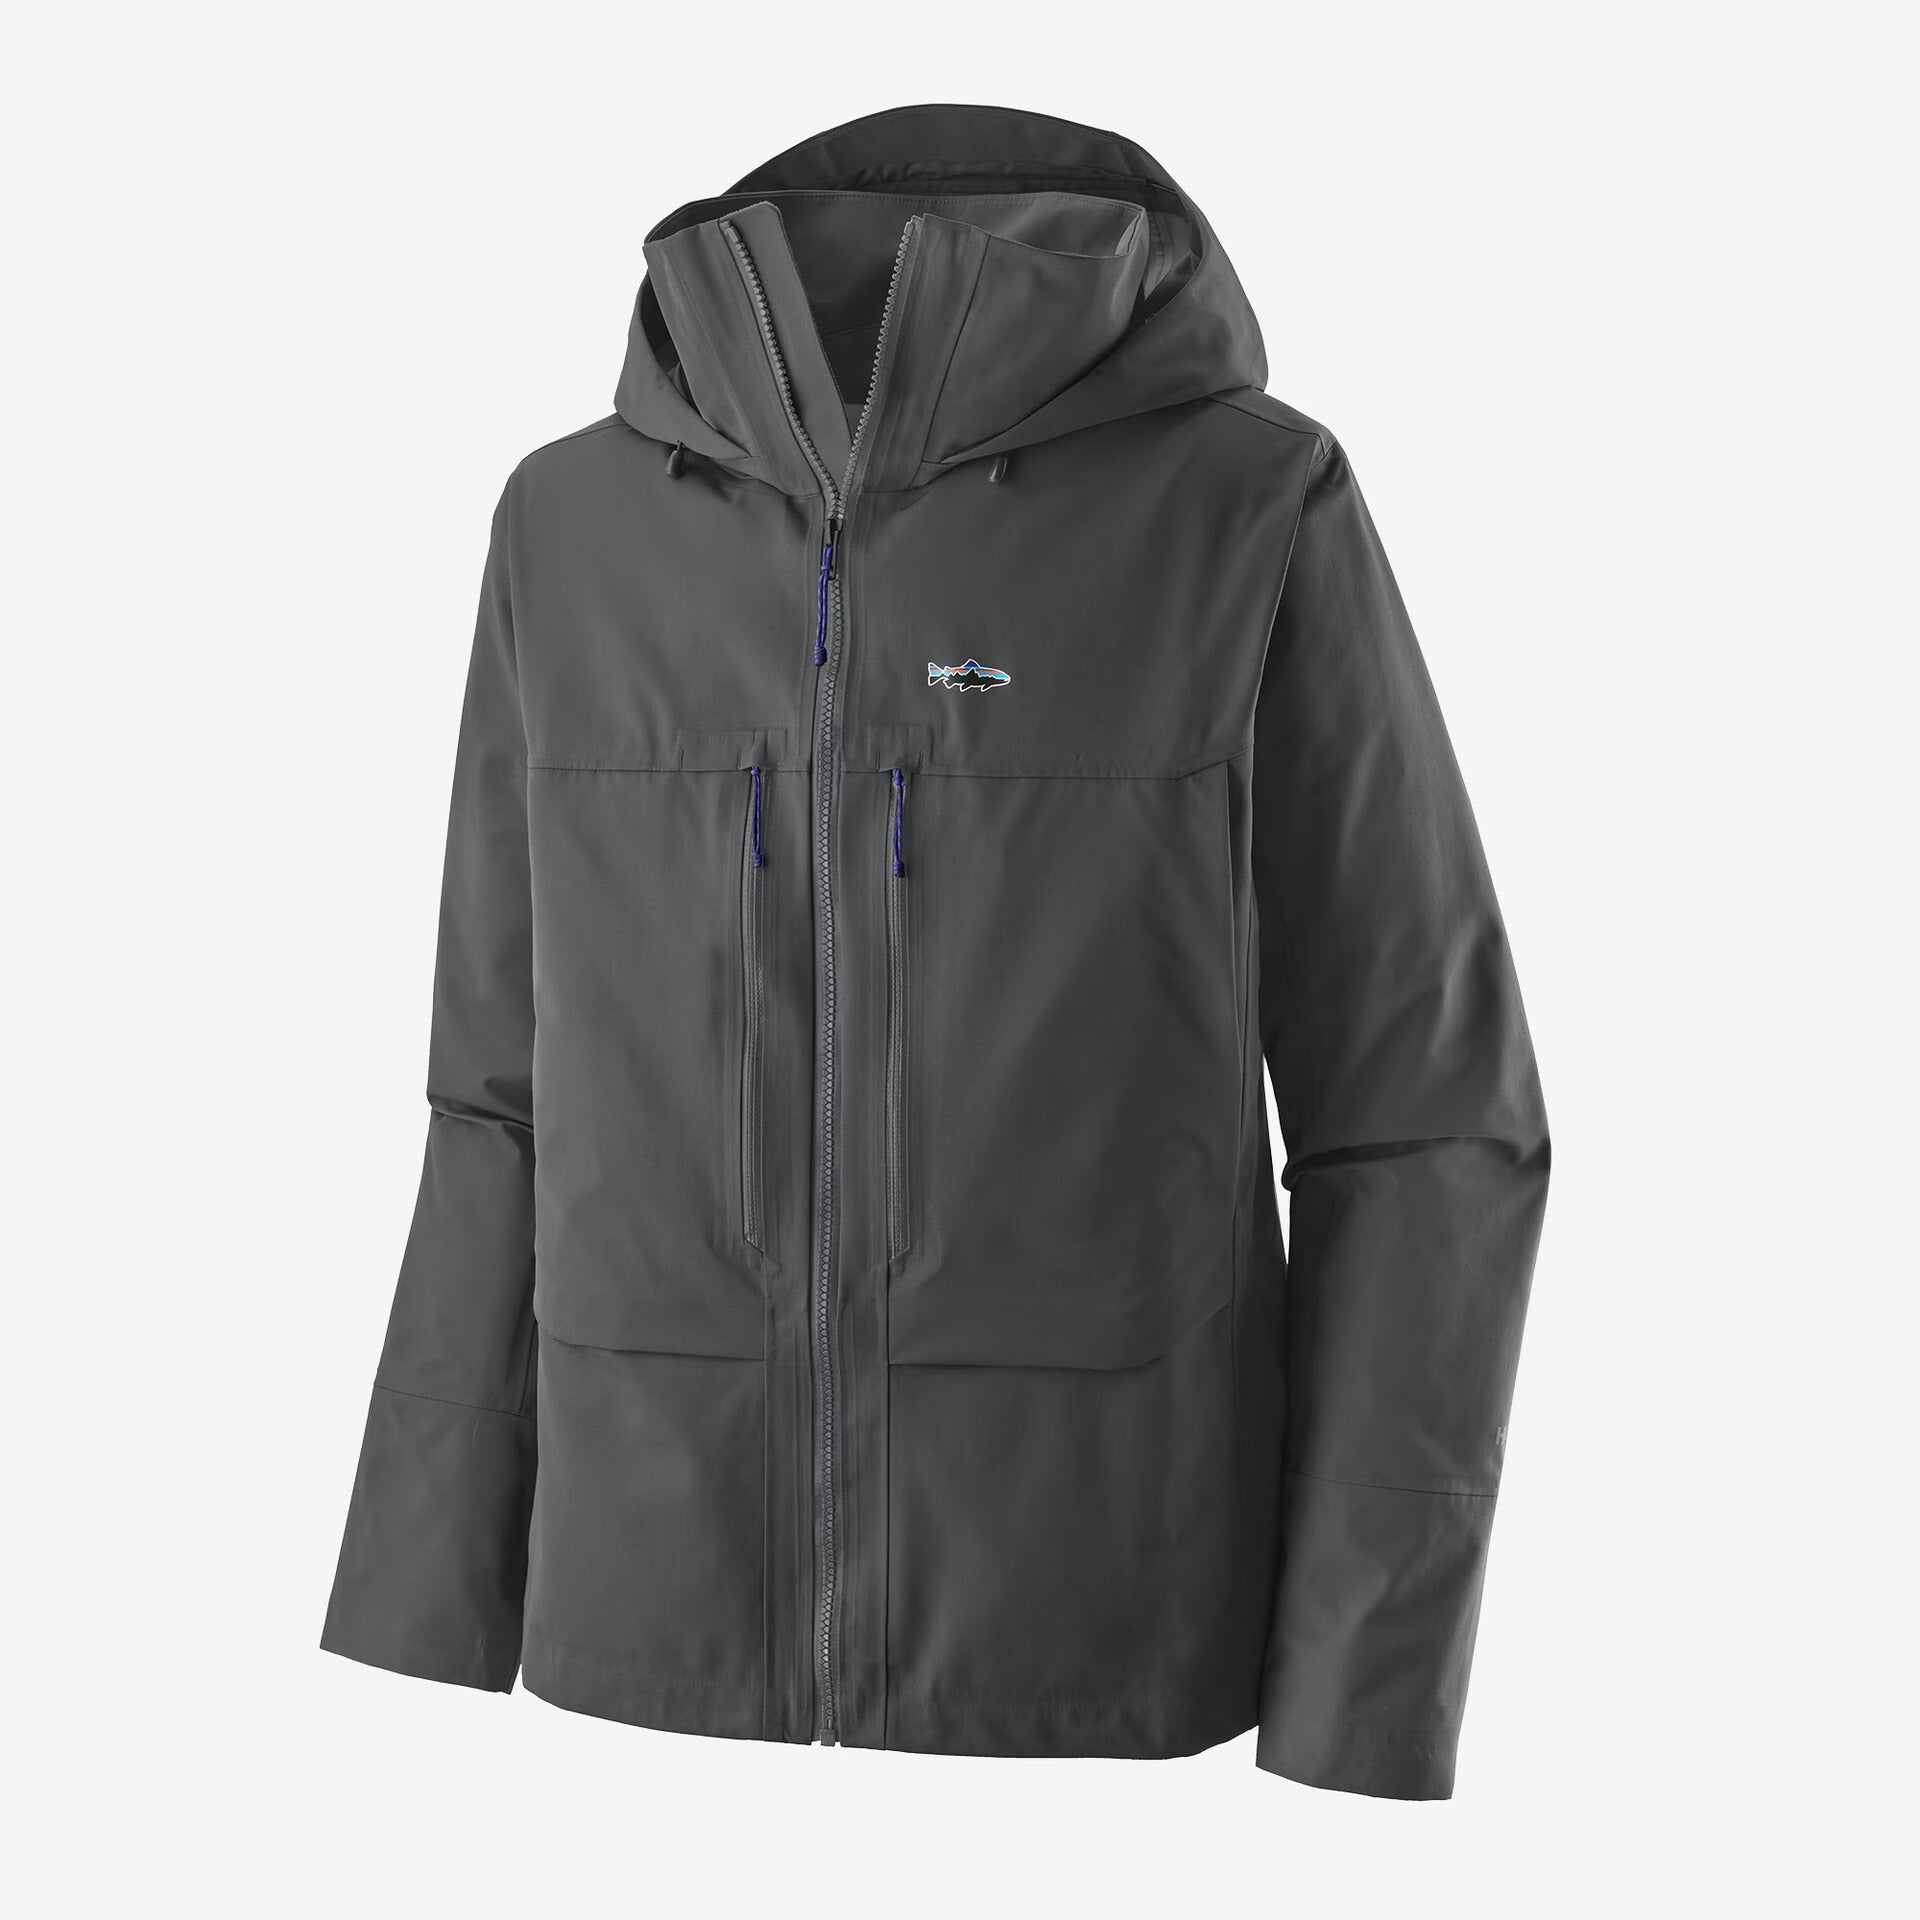 Patagonia Swiftcurrent Jacket Forge Grey / M